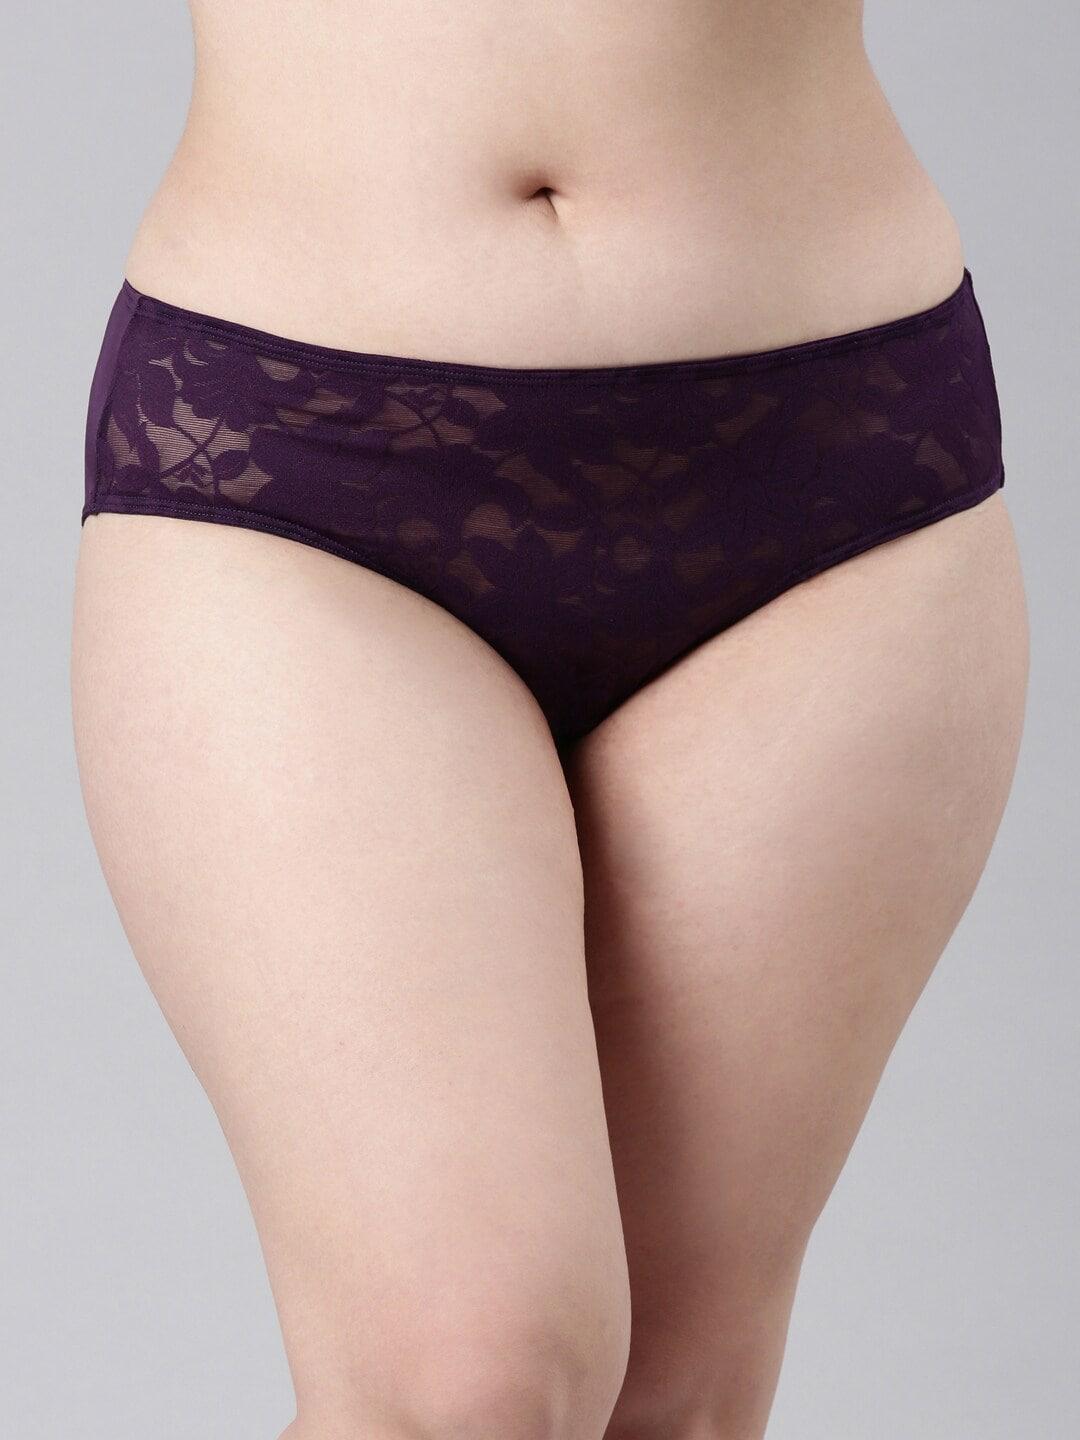 enamor-women-mid-rise-lace-detail-flat-elasticated-hipster-briefs-p122